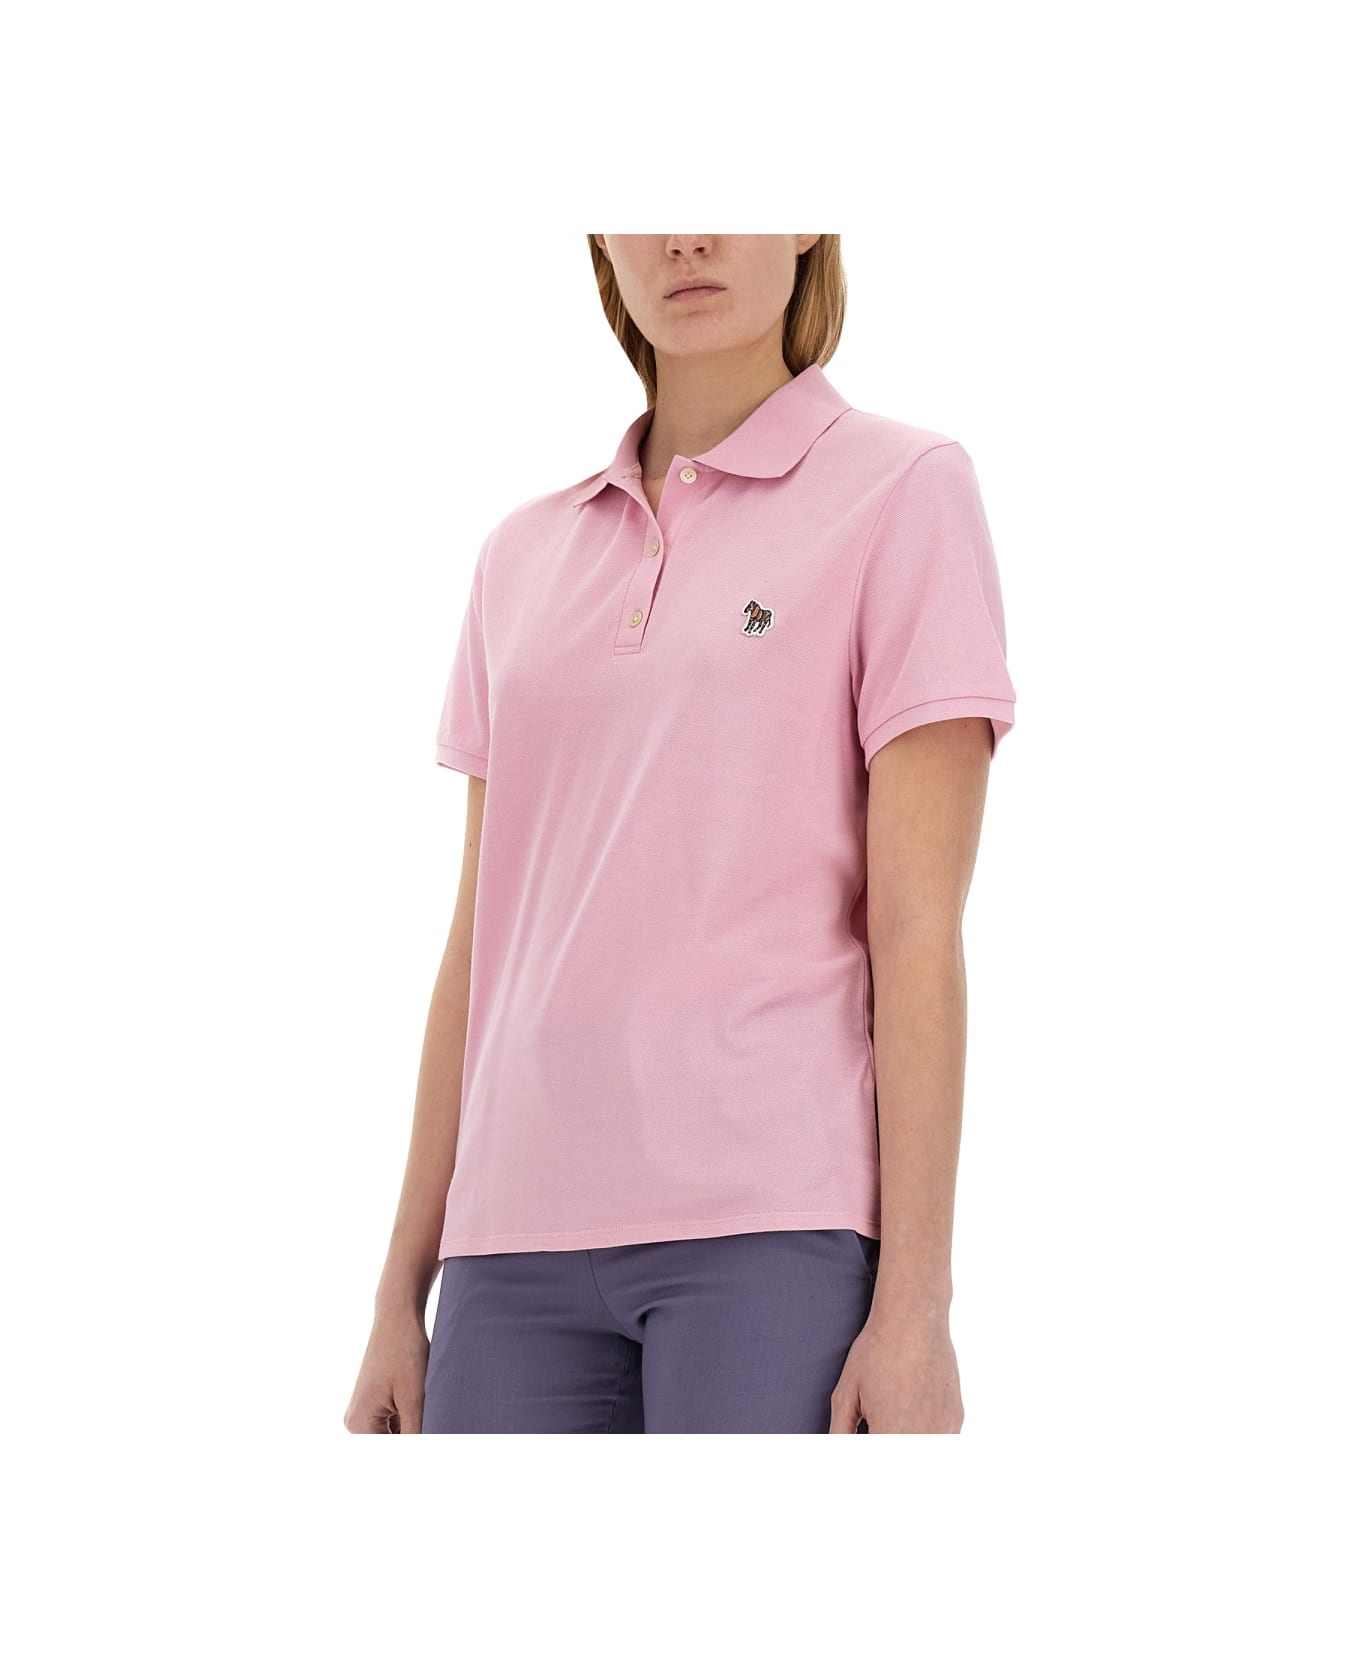 PS by Paul Smith 'zebra' Polo. - PINK ポロシャツ